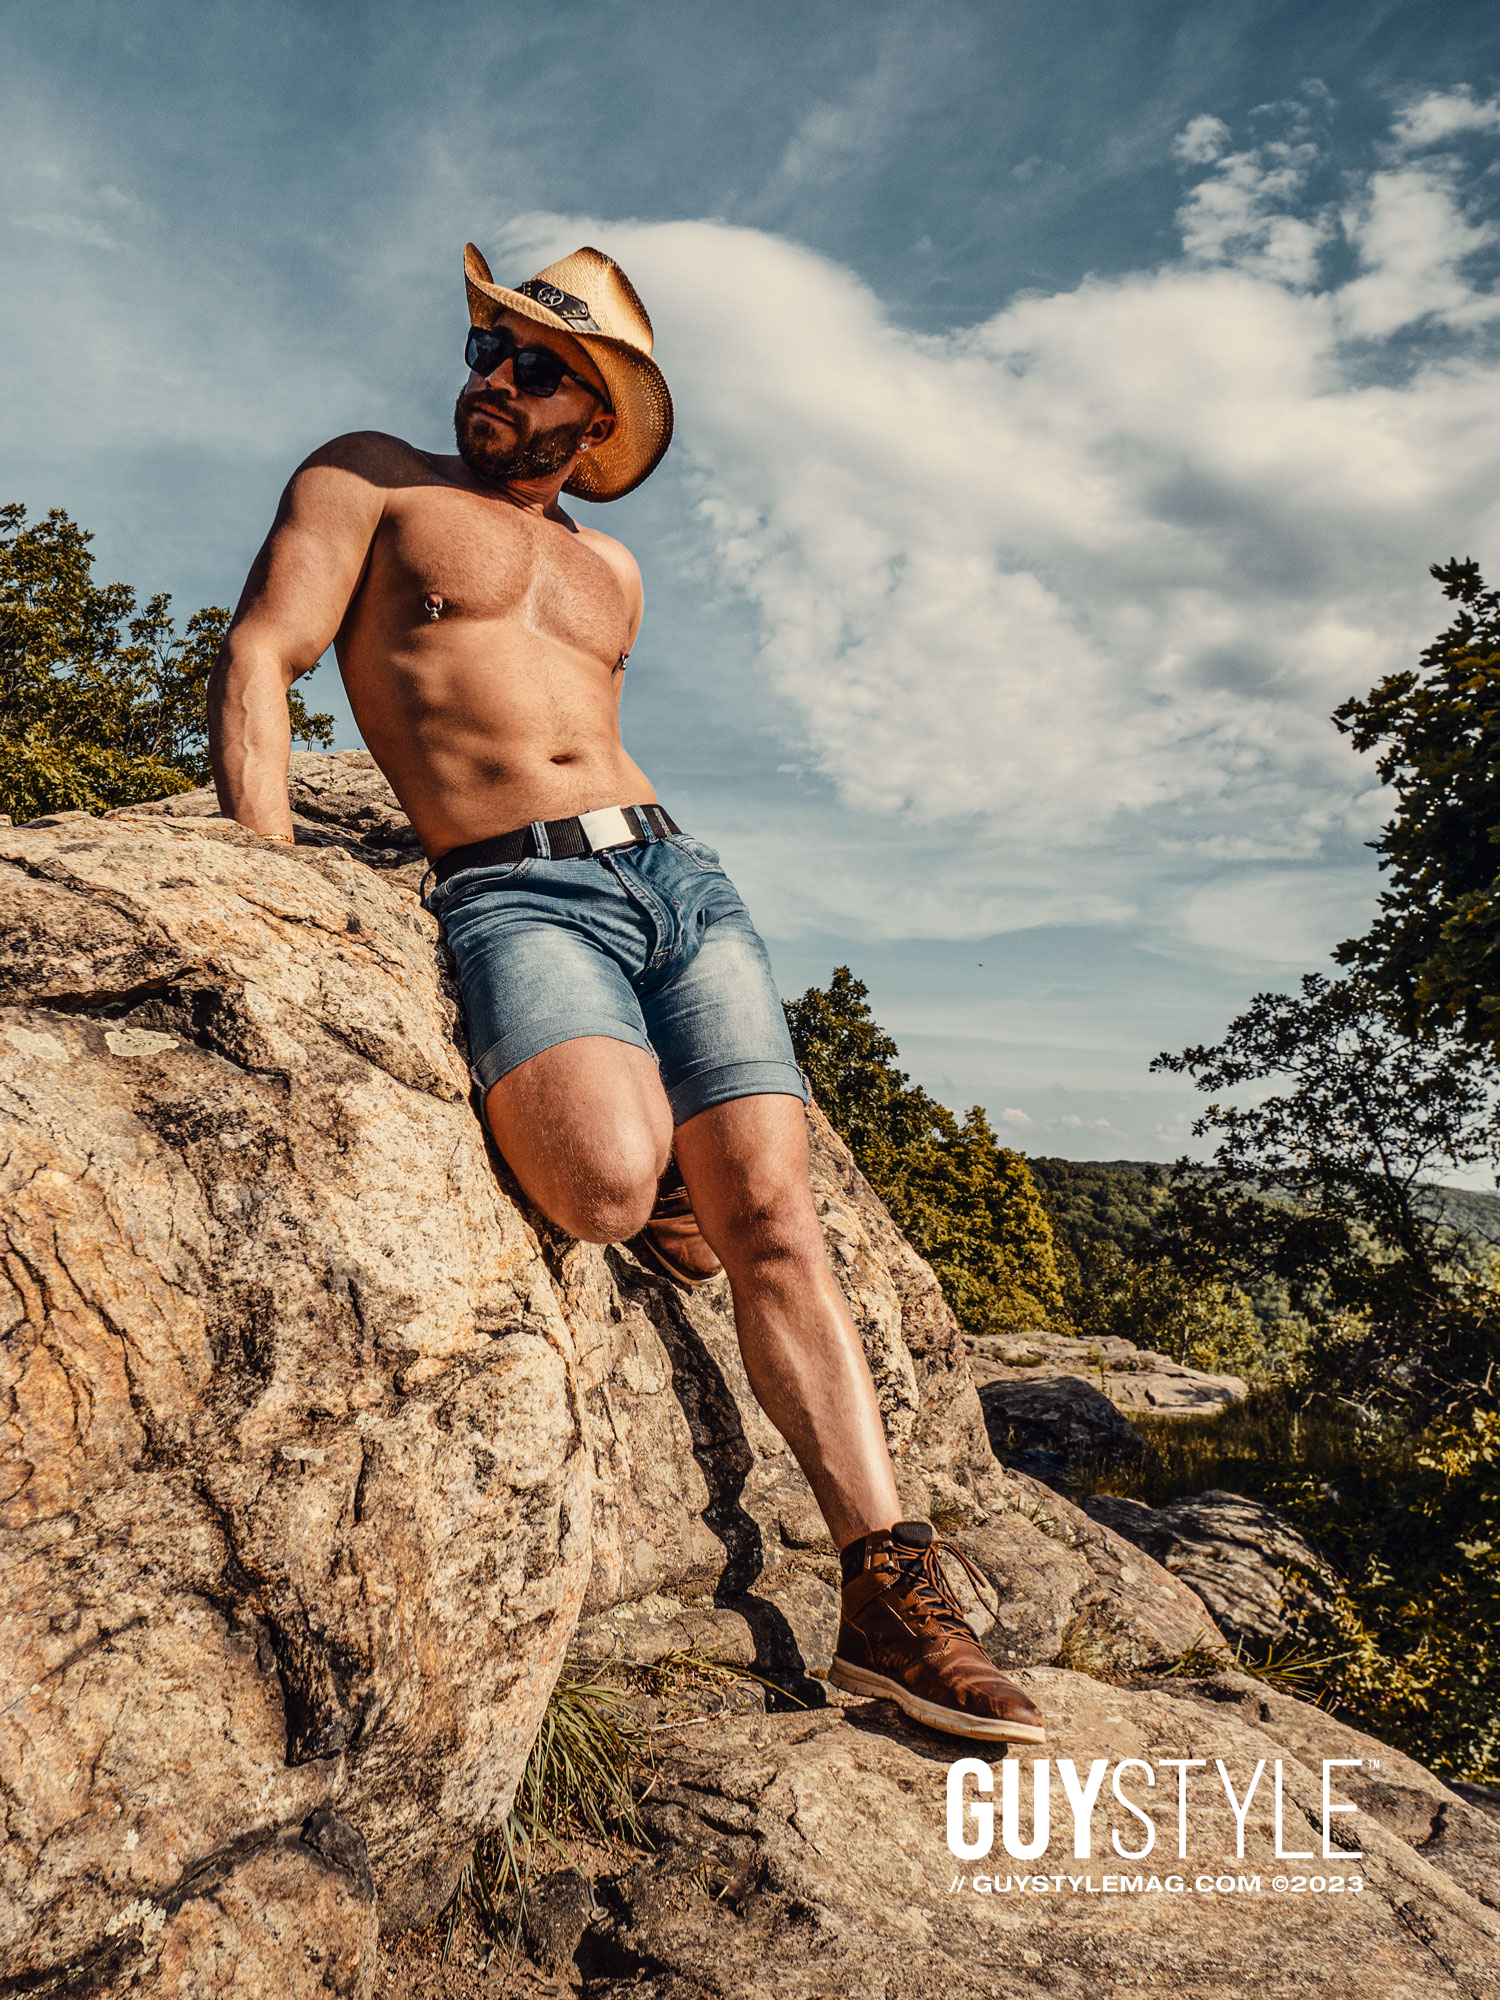 Hiking the Peaks and Valleys: A Bodybuilder's Journey in New York's Catskill Mountains – By Maxwell Alexander, Certified Bodybuilding and Sports Nutrition Coach – Presented by HARD SUPPS